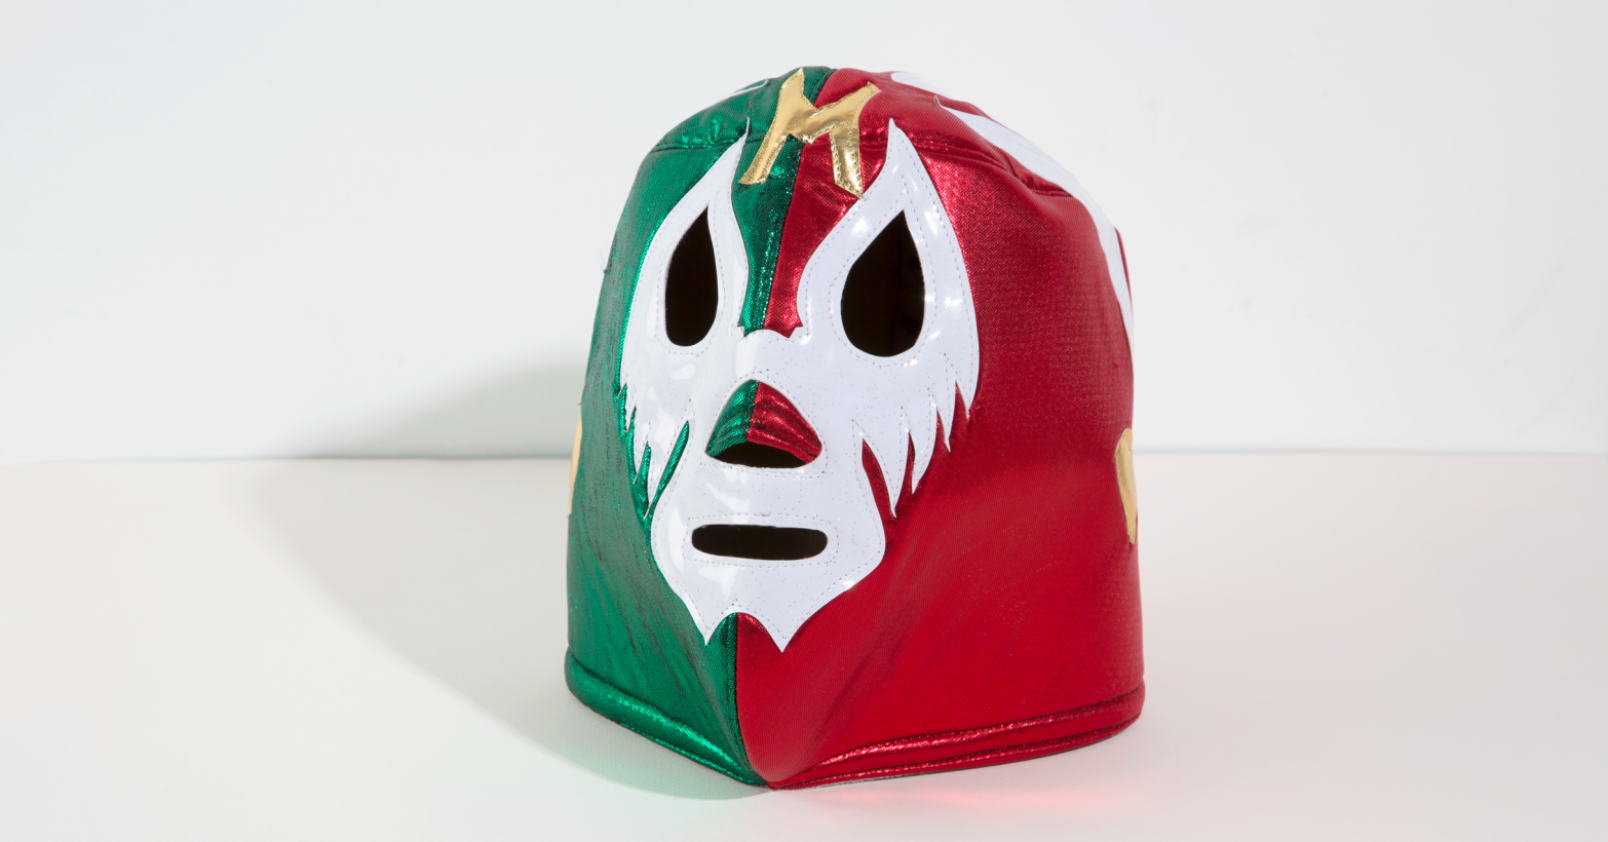 Kevin from Ludlow Kingsley shares a Luchador mask and answers a question about happiness